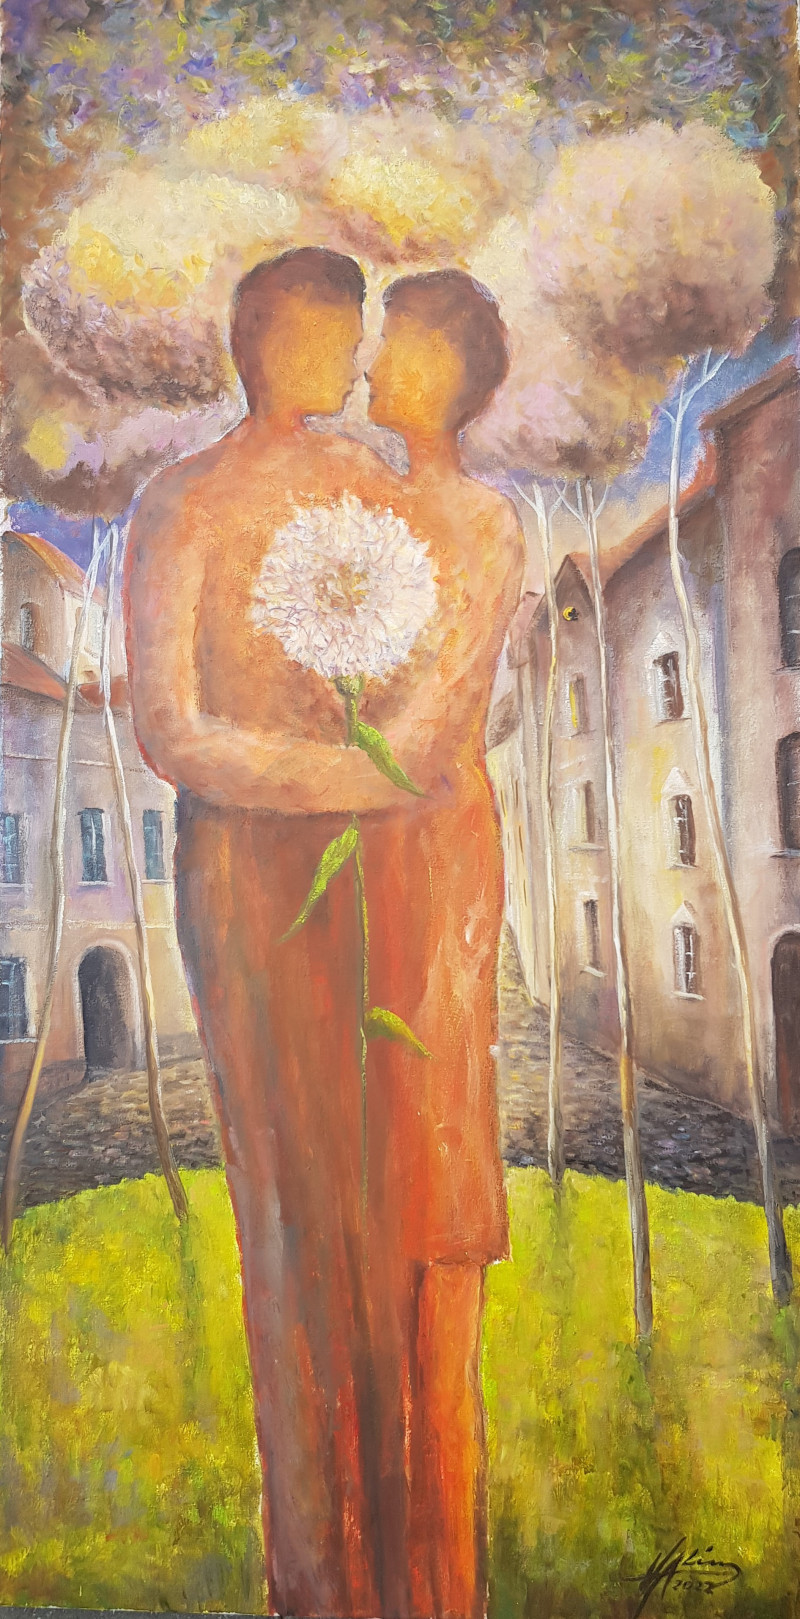 In the Evening at the End of the Little Street original painting by Voldemaras Valius. Fantastic